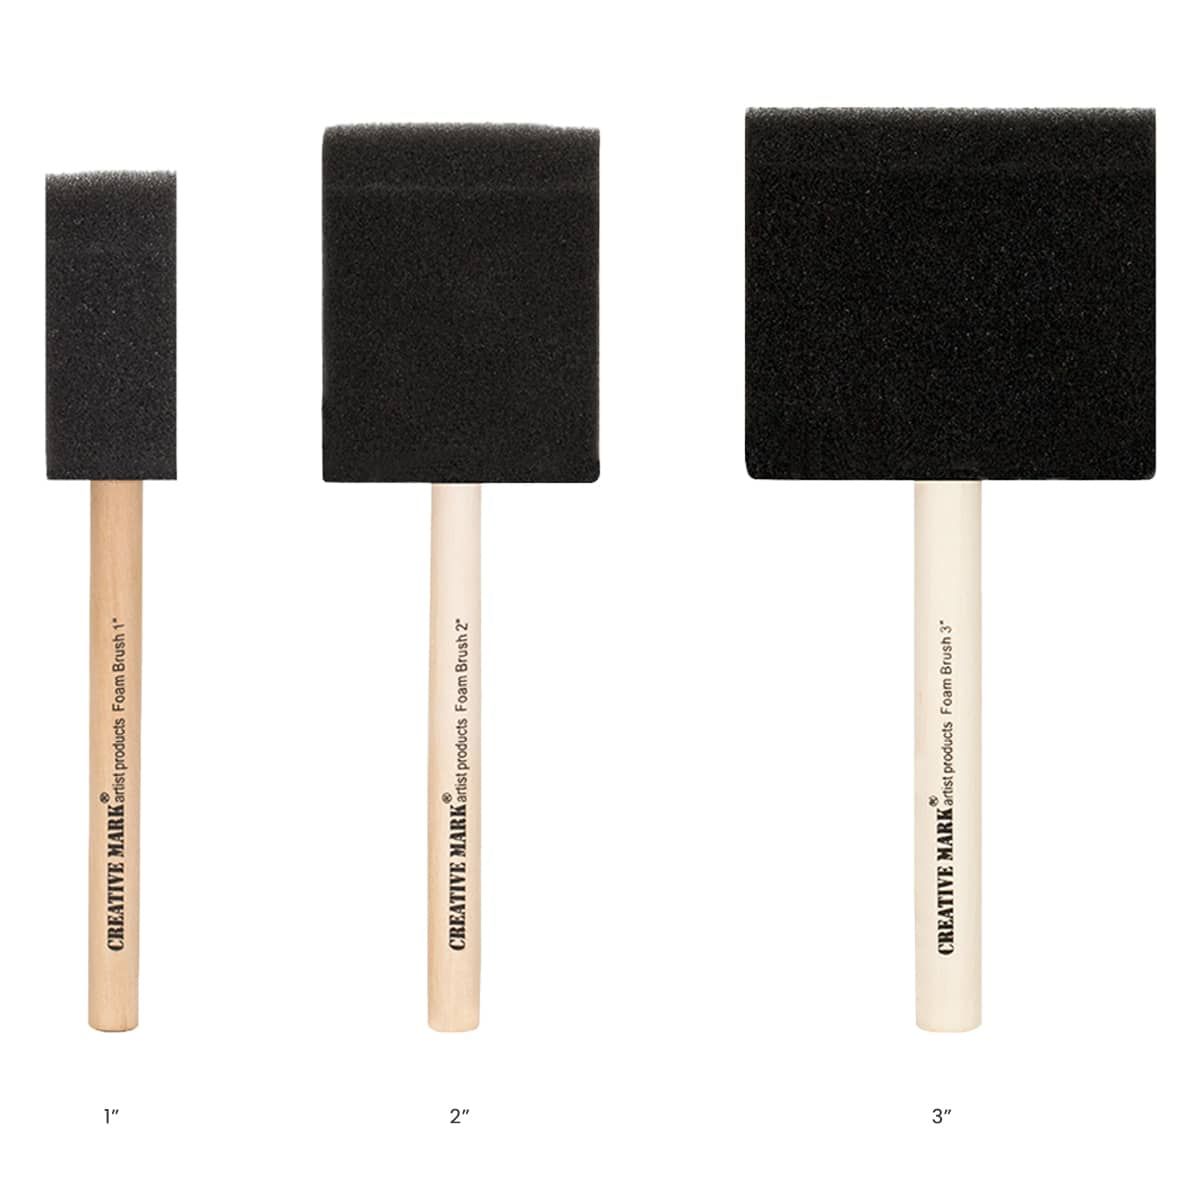 Available in single sized sets of 6 in 1", 2", and 3" foam brushes